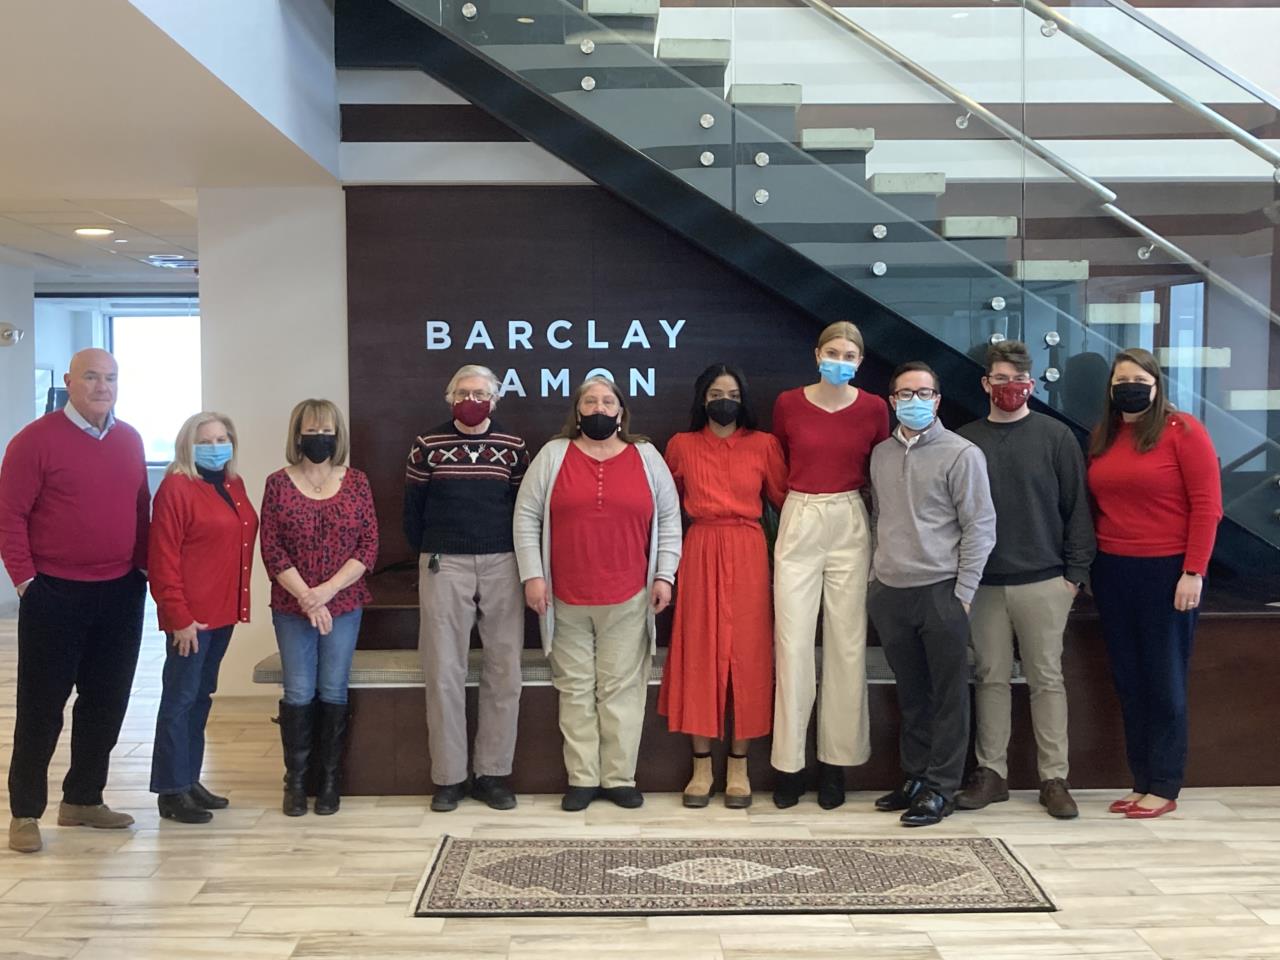 On February 4, 2022, attorneys and staff in the Syracuse office supported the American Heart Association by wearing red to increase women’s heart health awareness.